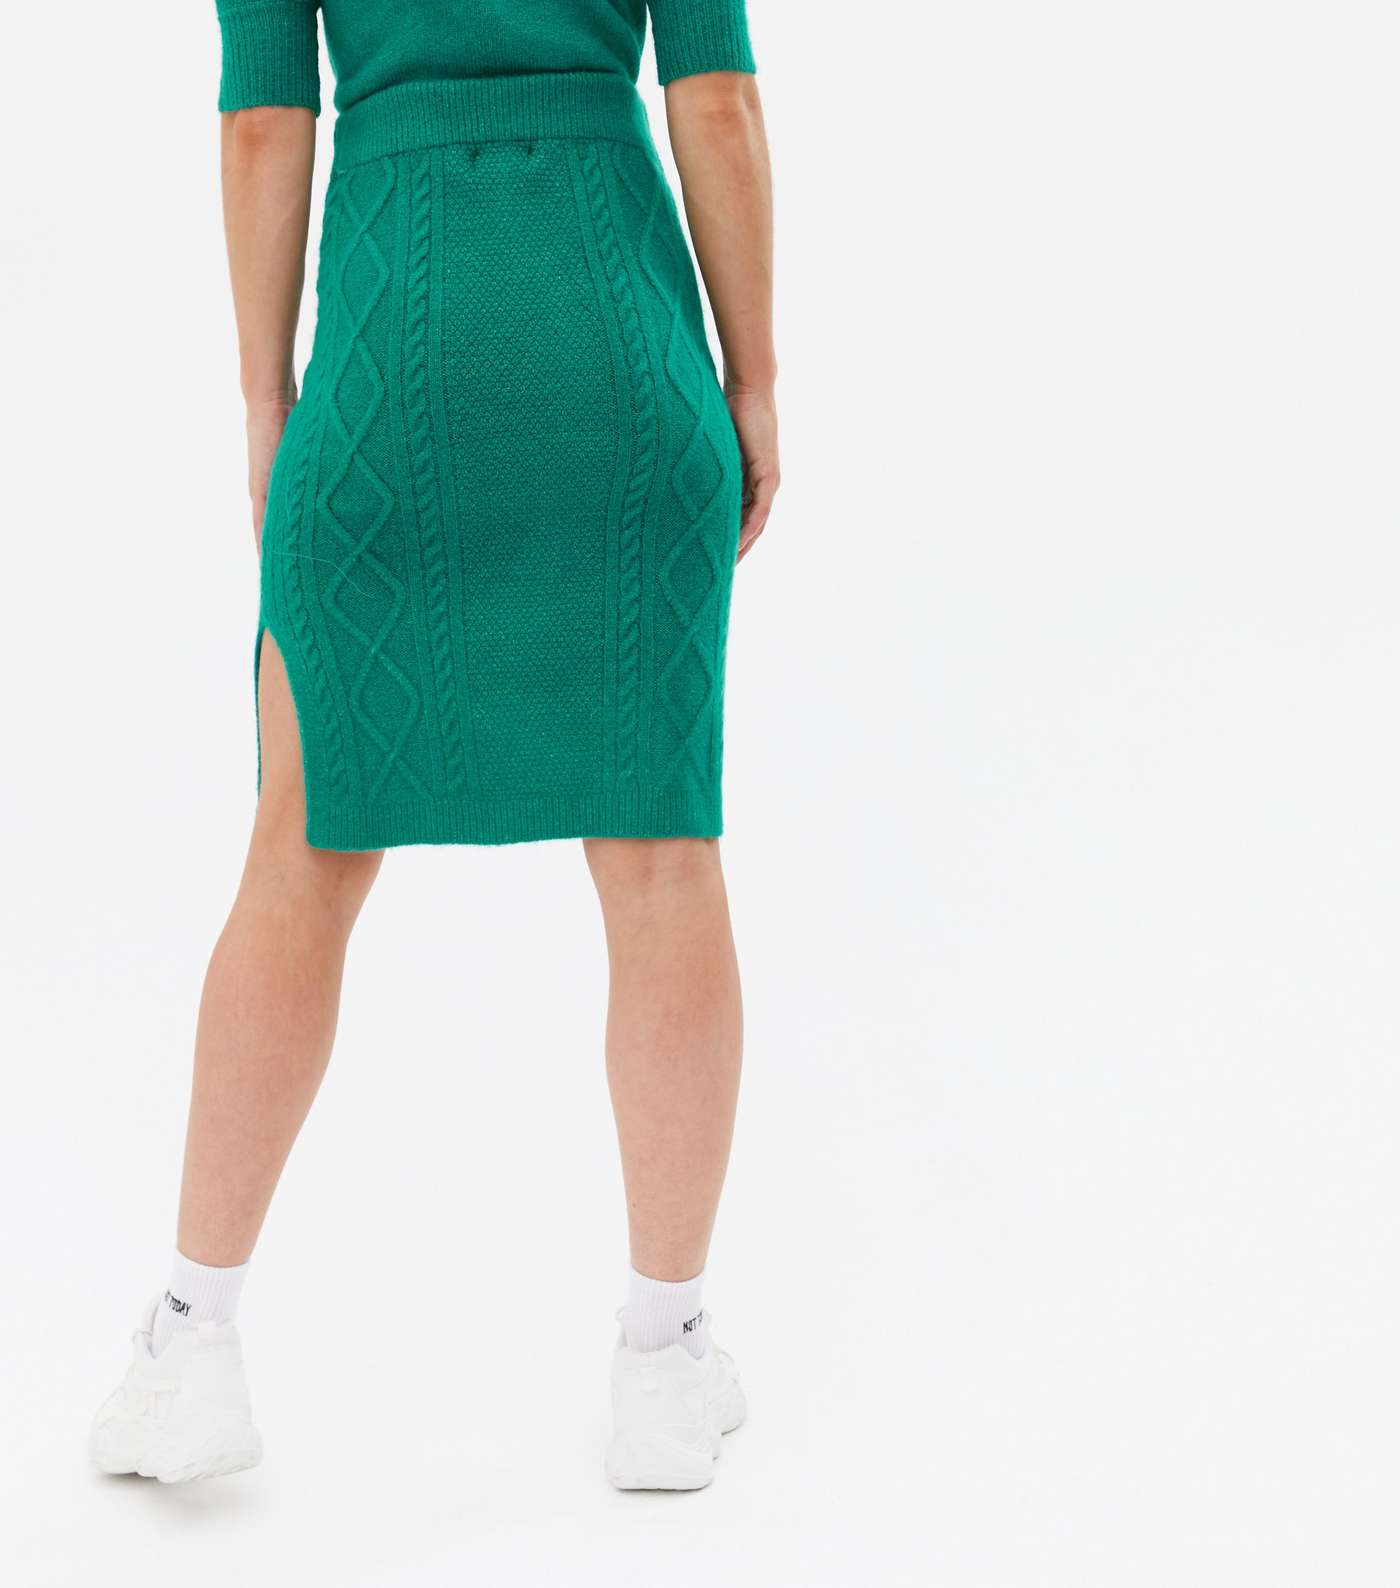 Sunshine Soul Green Cable Knit Bodycon Skirt Image 4